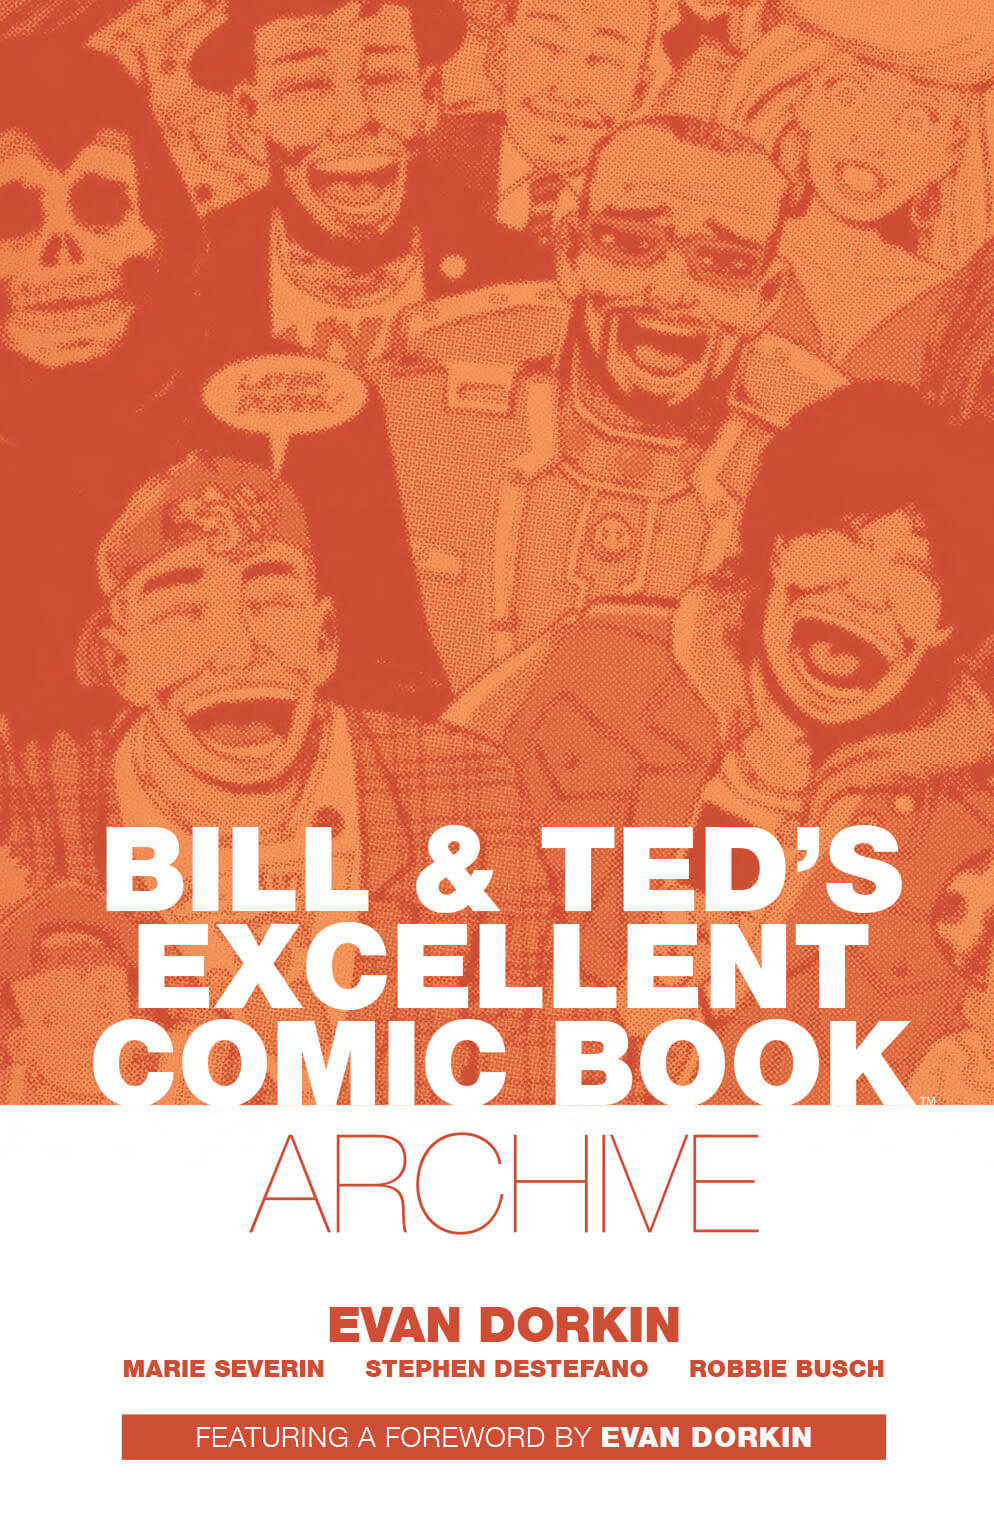 BillTed_Archive_cover